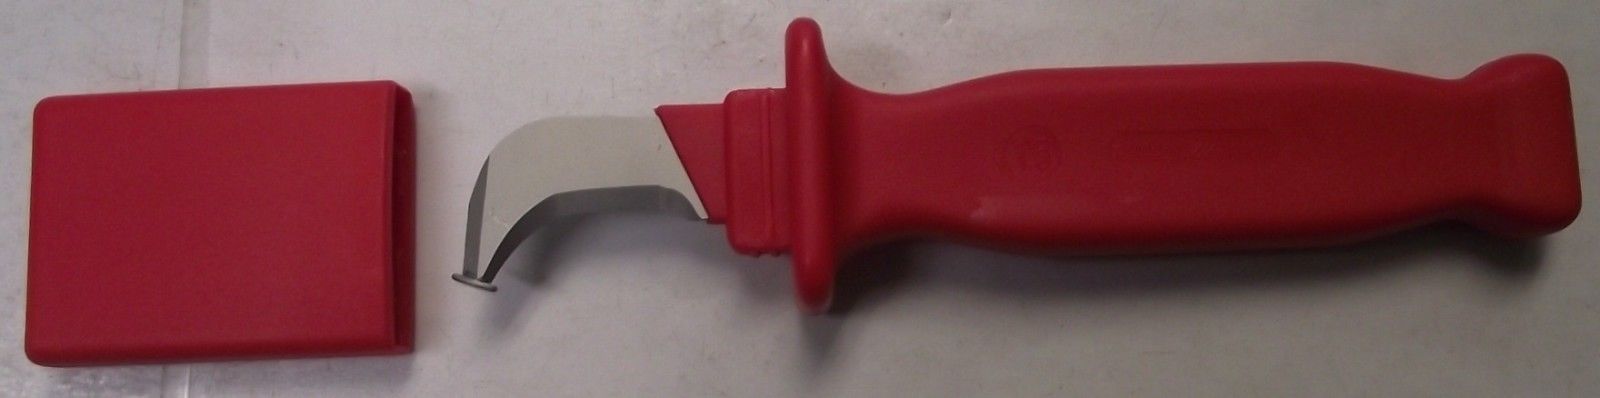 GEDORE 6698490 Vde Cable Knife With Hooked Blade Germany